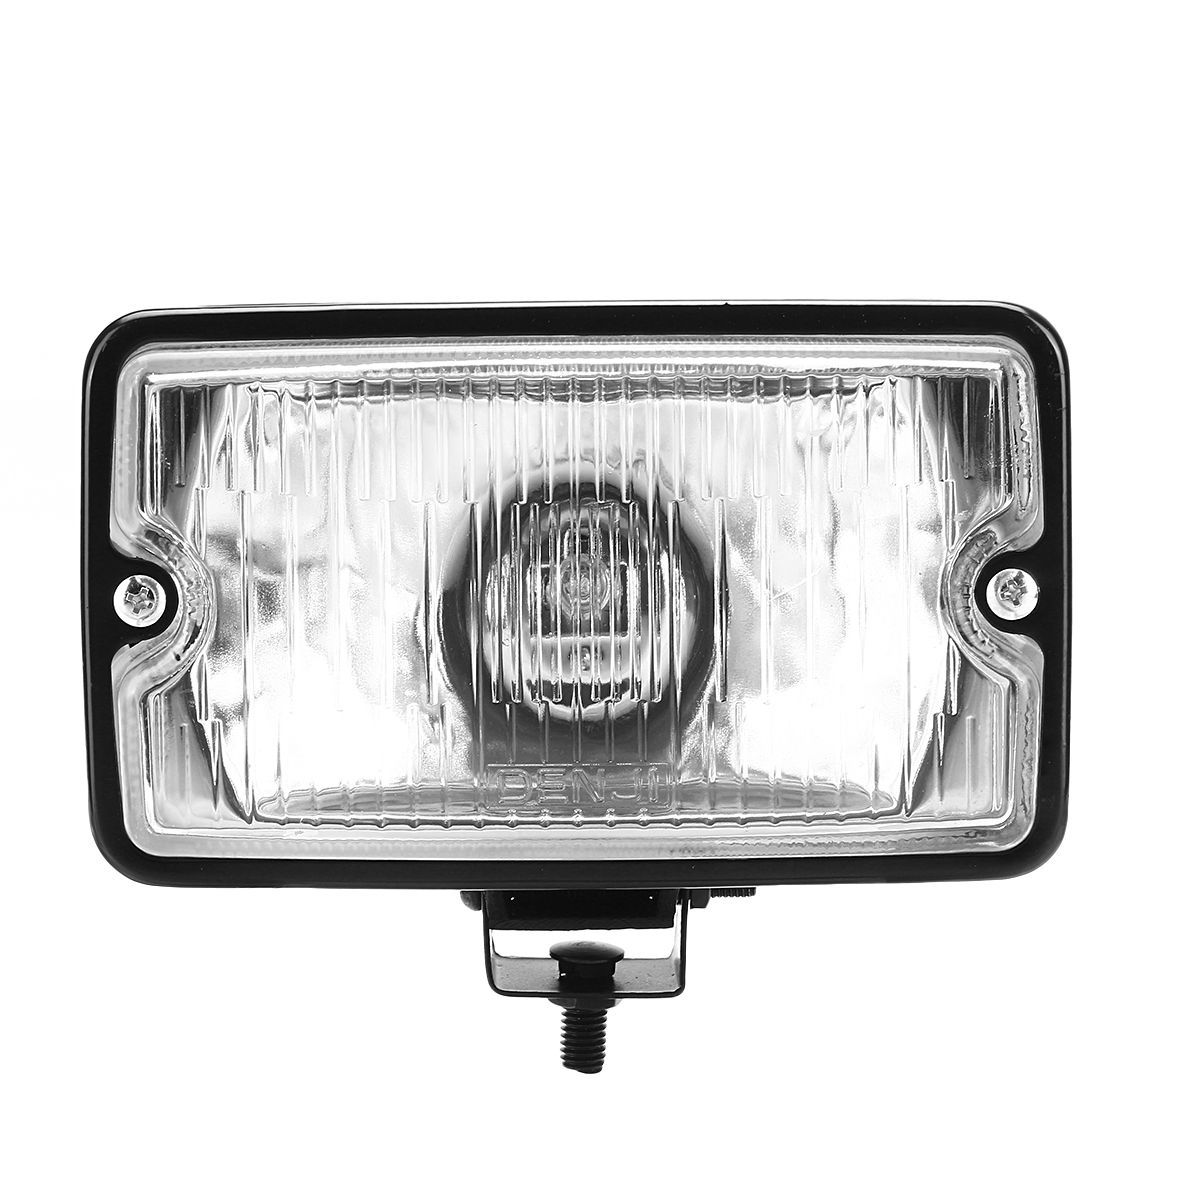 Front-Bumper-Driving-Fog-Light-Lamp-with-H3-Bulb-For-Peugeot-205-GTI-CTI-106-306-Mi16-1724056